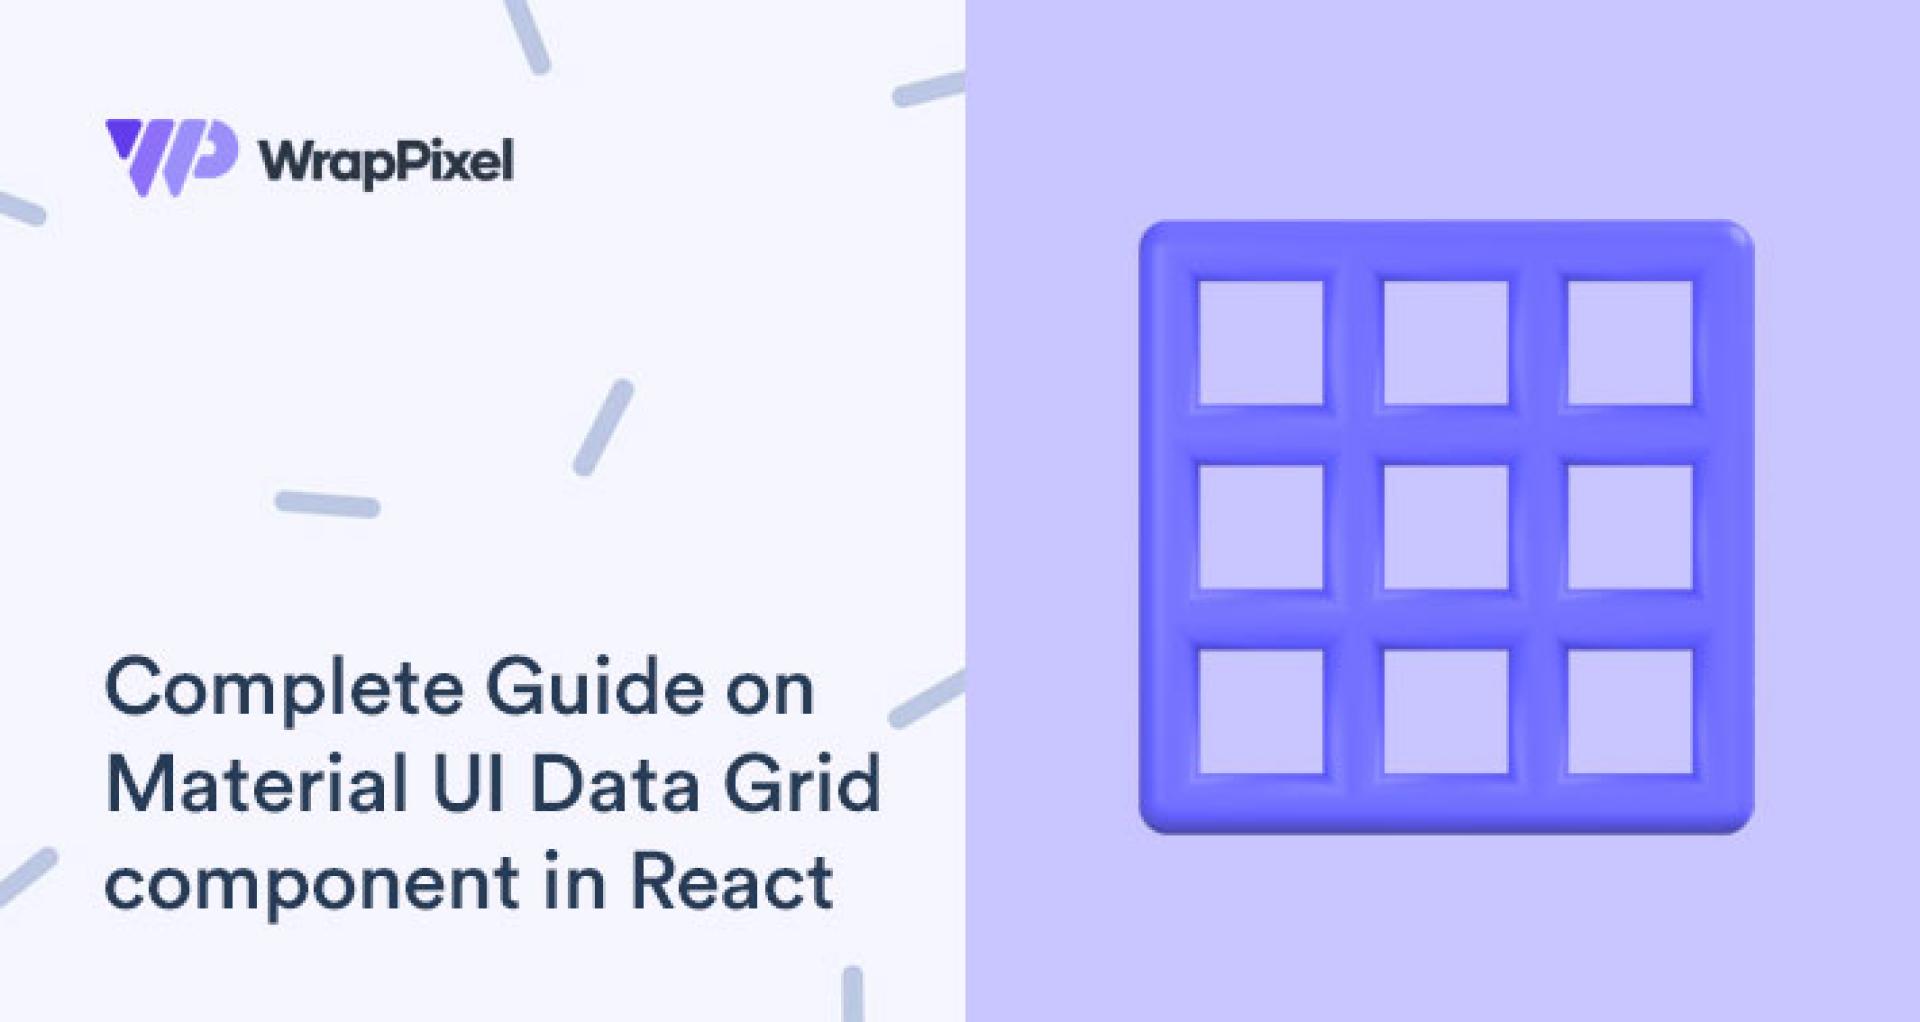 Using Data Grid Component in MUI X (Material UI) with React